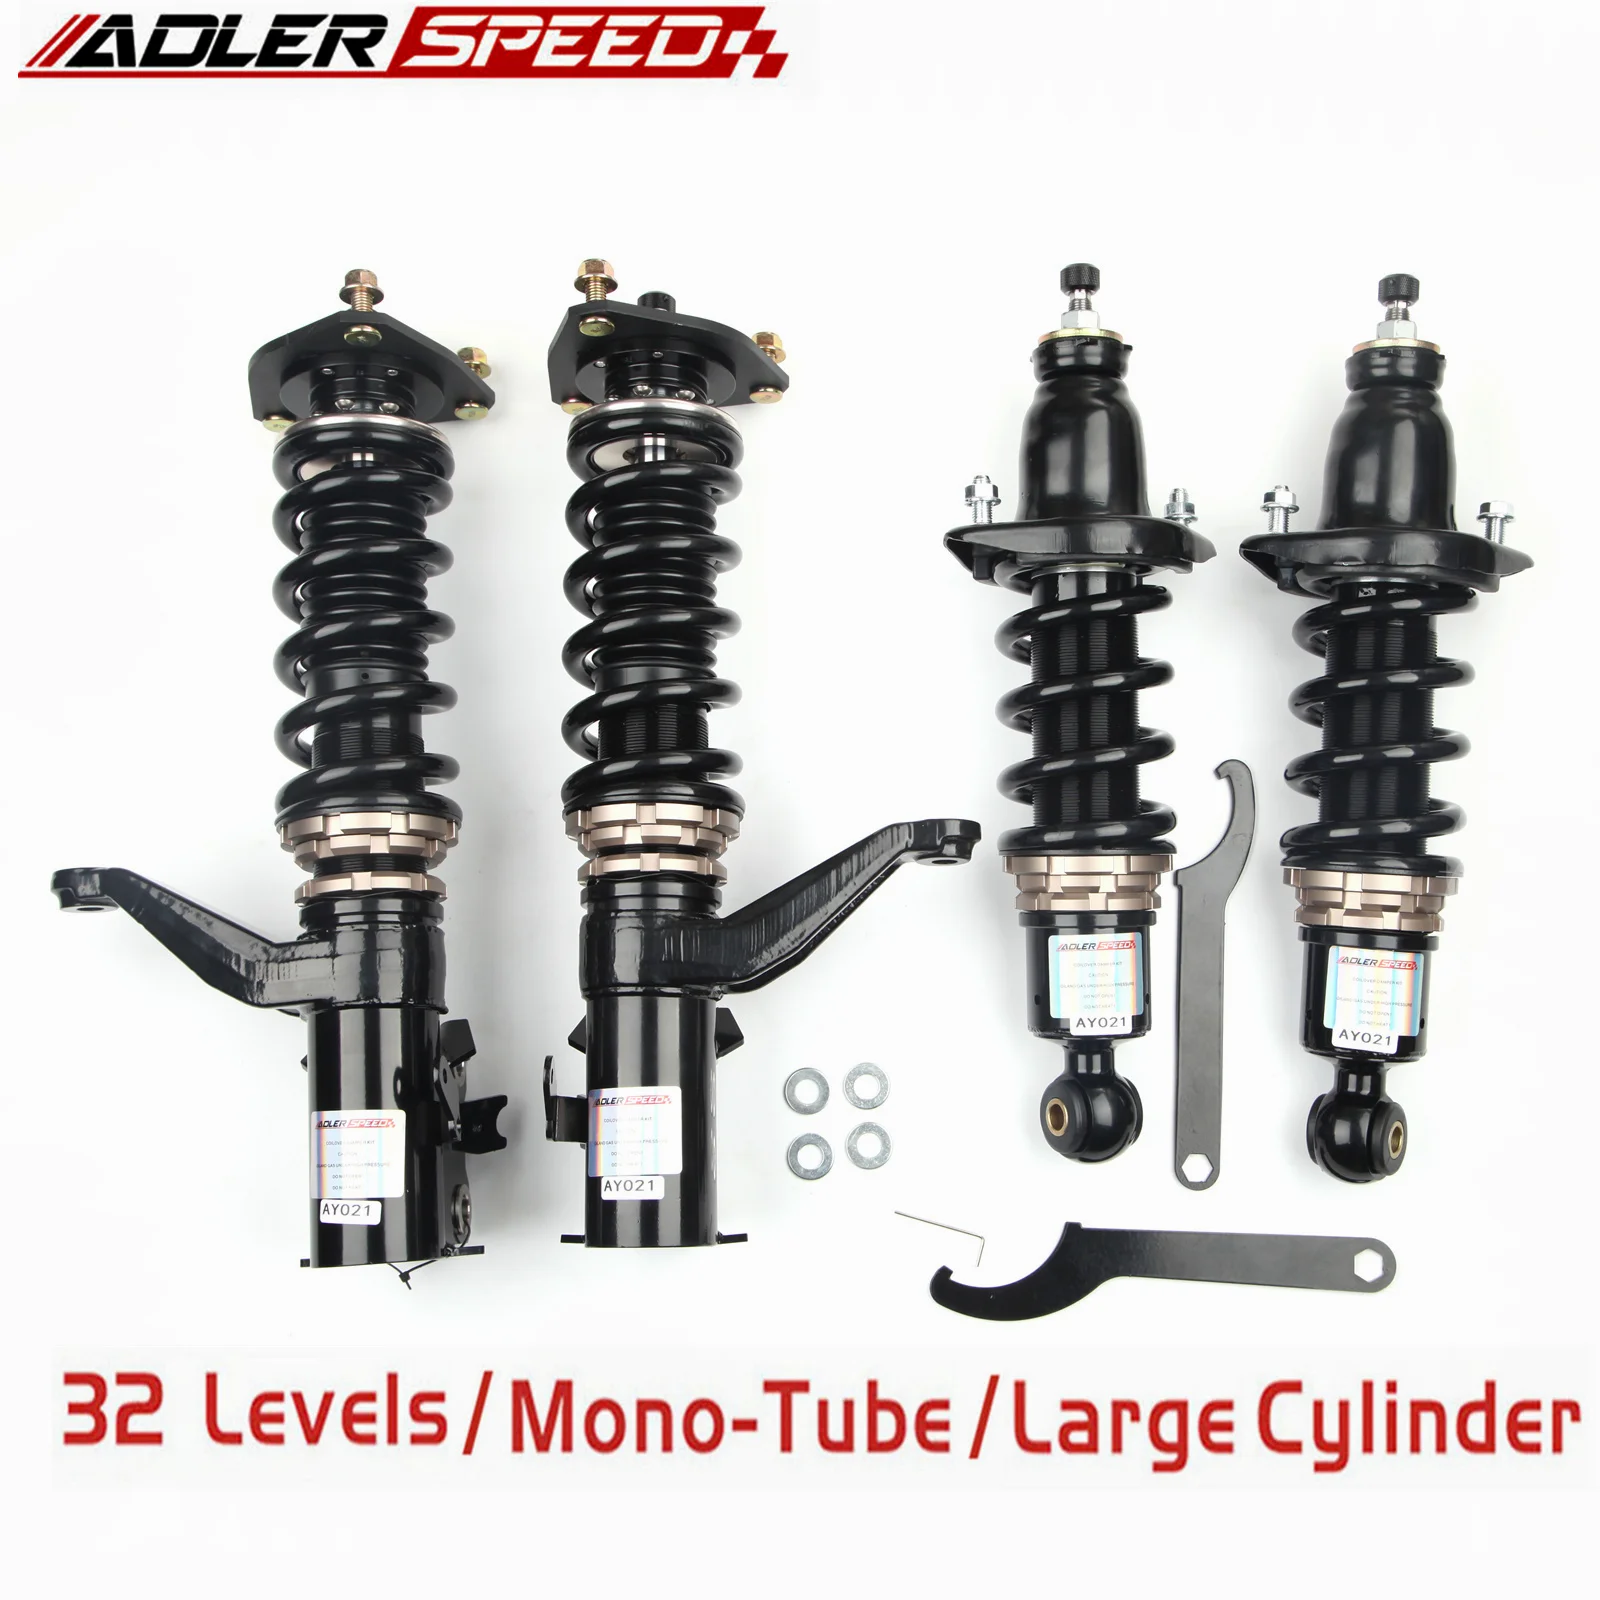 

ADLERSPEED 32 Steps Mono Tube Coilovers Suspension For Honda Civic EP3 Si 02-05